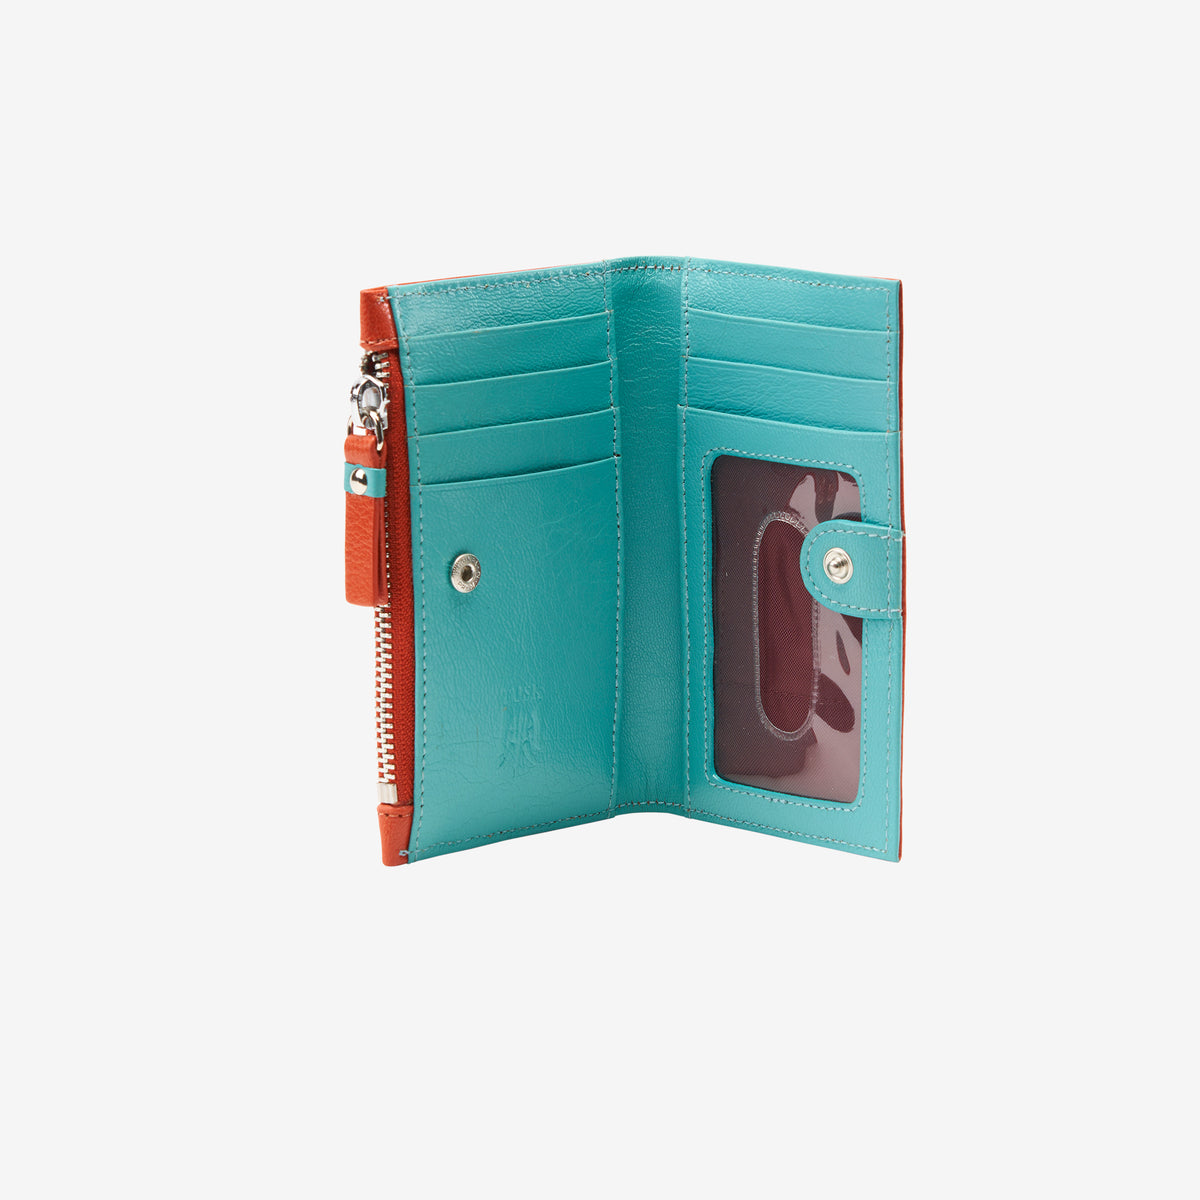    tusk-383-leather-slim-card-case-with-zip-coin-pocket-orange-and-sky-open